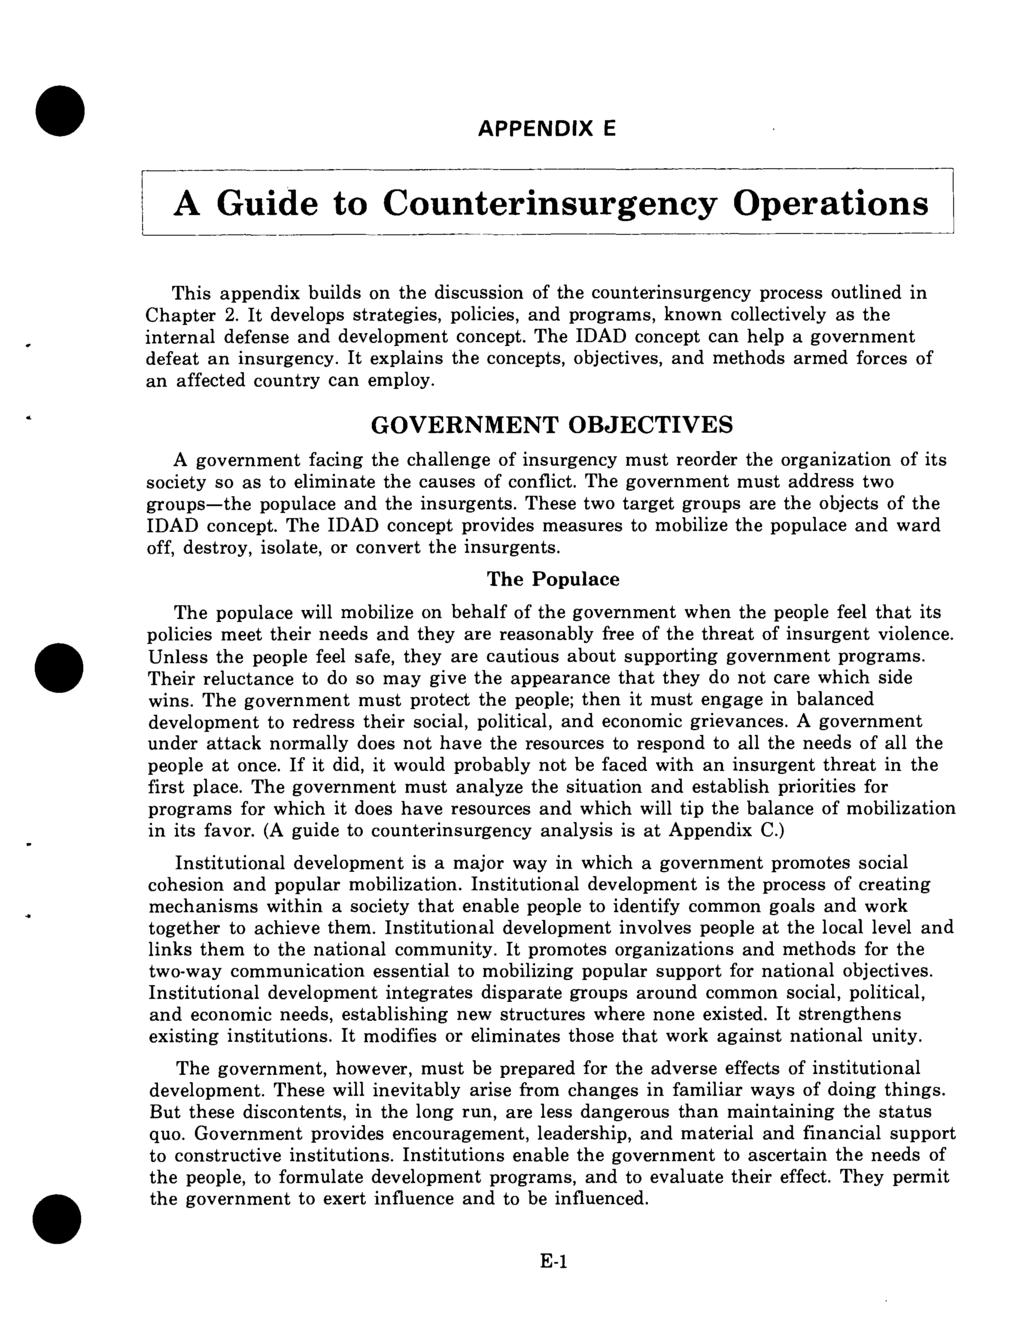 APPENDIX E A Guide to Counterinsurgency Operations This appendix builds on the discussion of the counterinsurgency process outlined in Chapter 2.